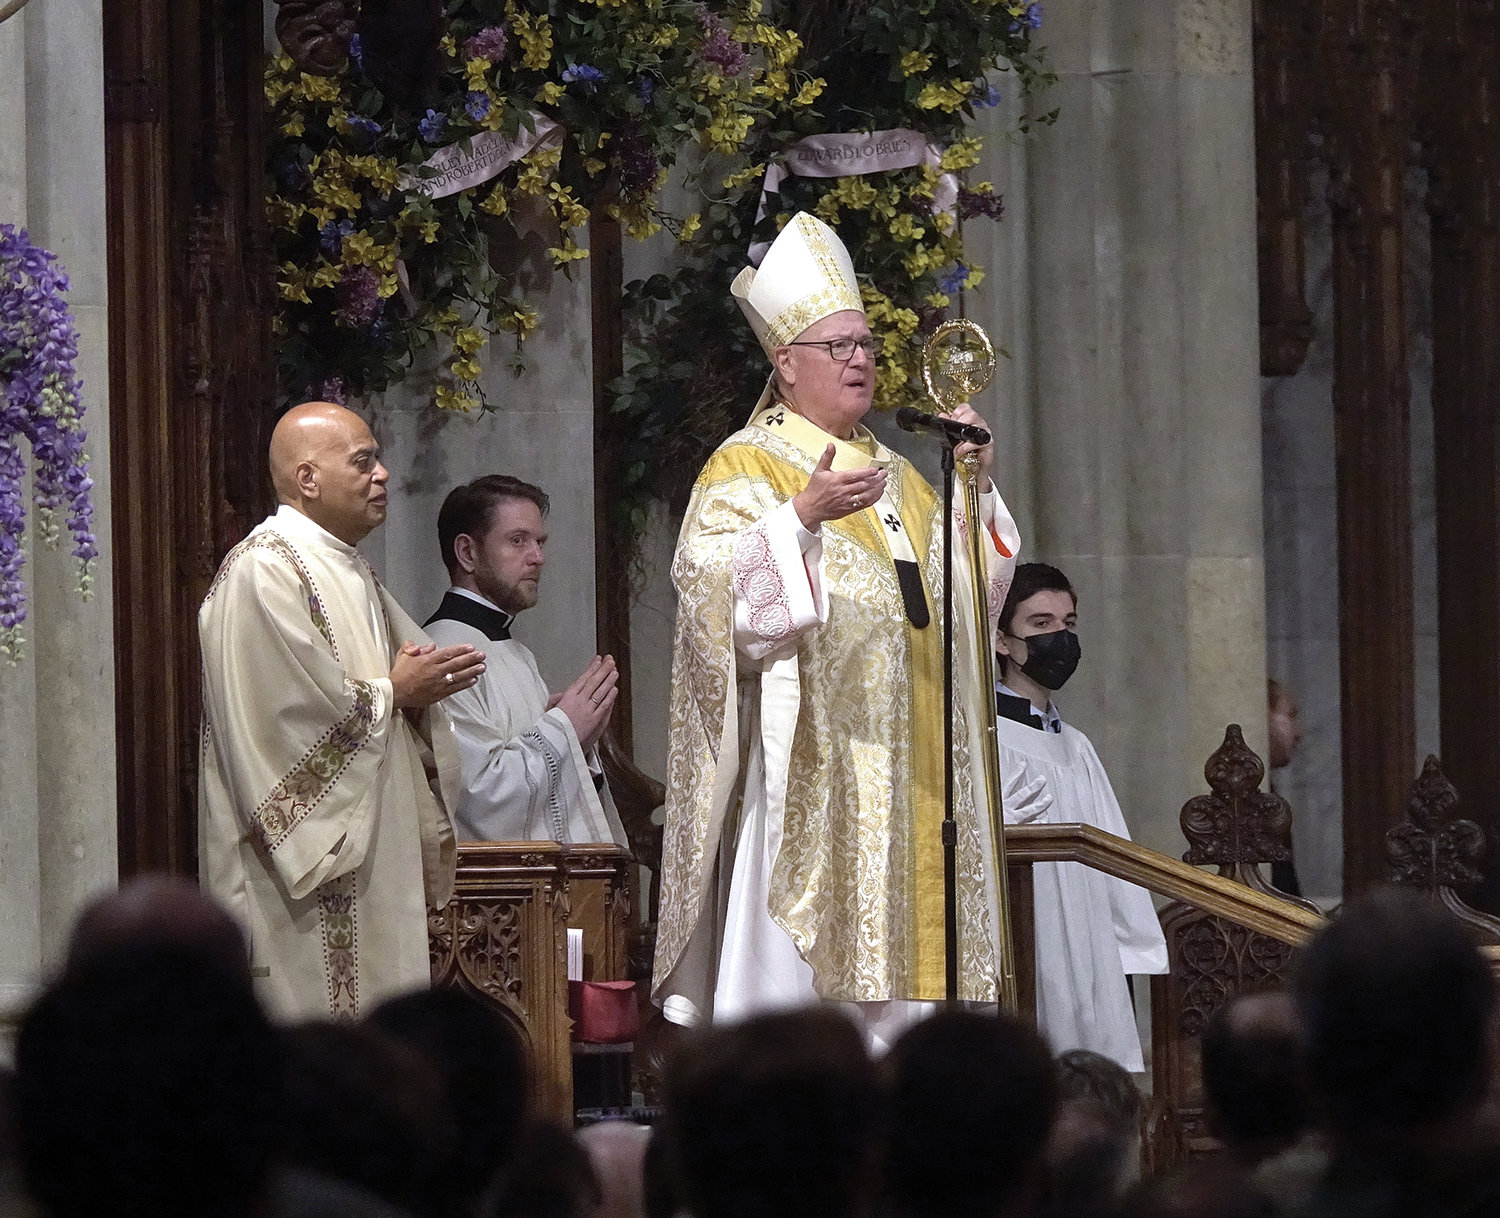 Precious flowers, generously donated in the name of Cardinal Dolan’s late parents, gracefully frame the cathedra at St. Patrick’s Cathedral during the 10 a.m. Mass the cardinal celebrated on Easter Sunday, April 17.